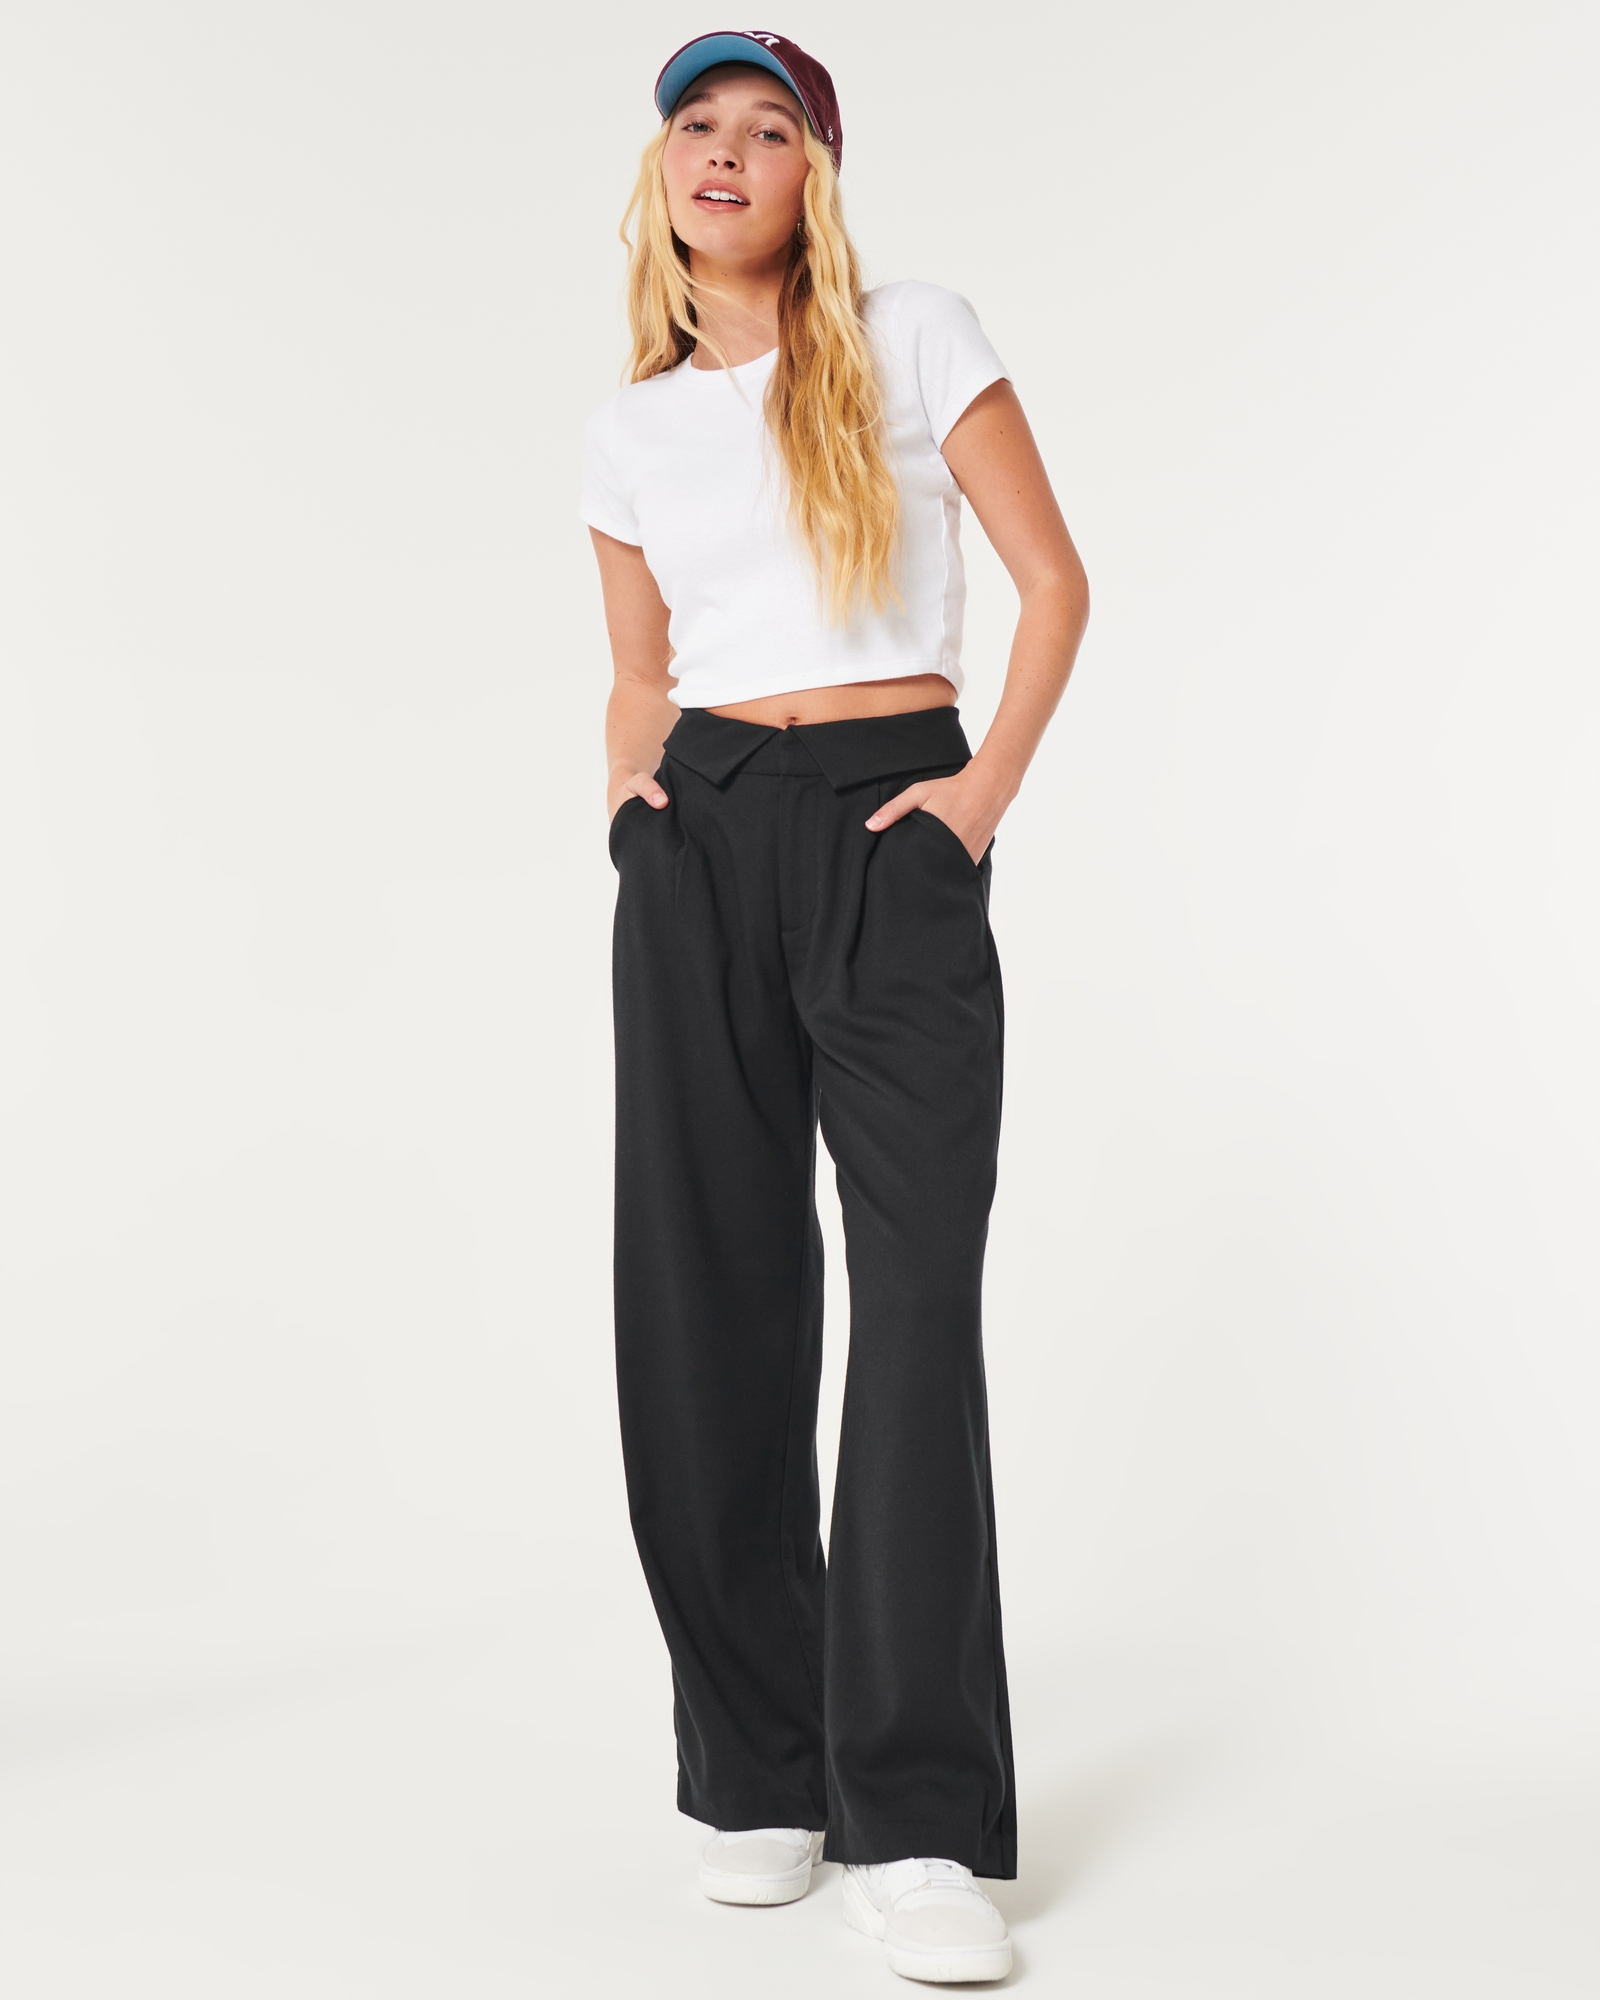 Collared Top & Wide Leg Jeans (on sale) - LivvyLand